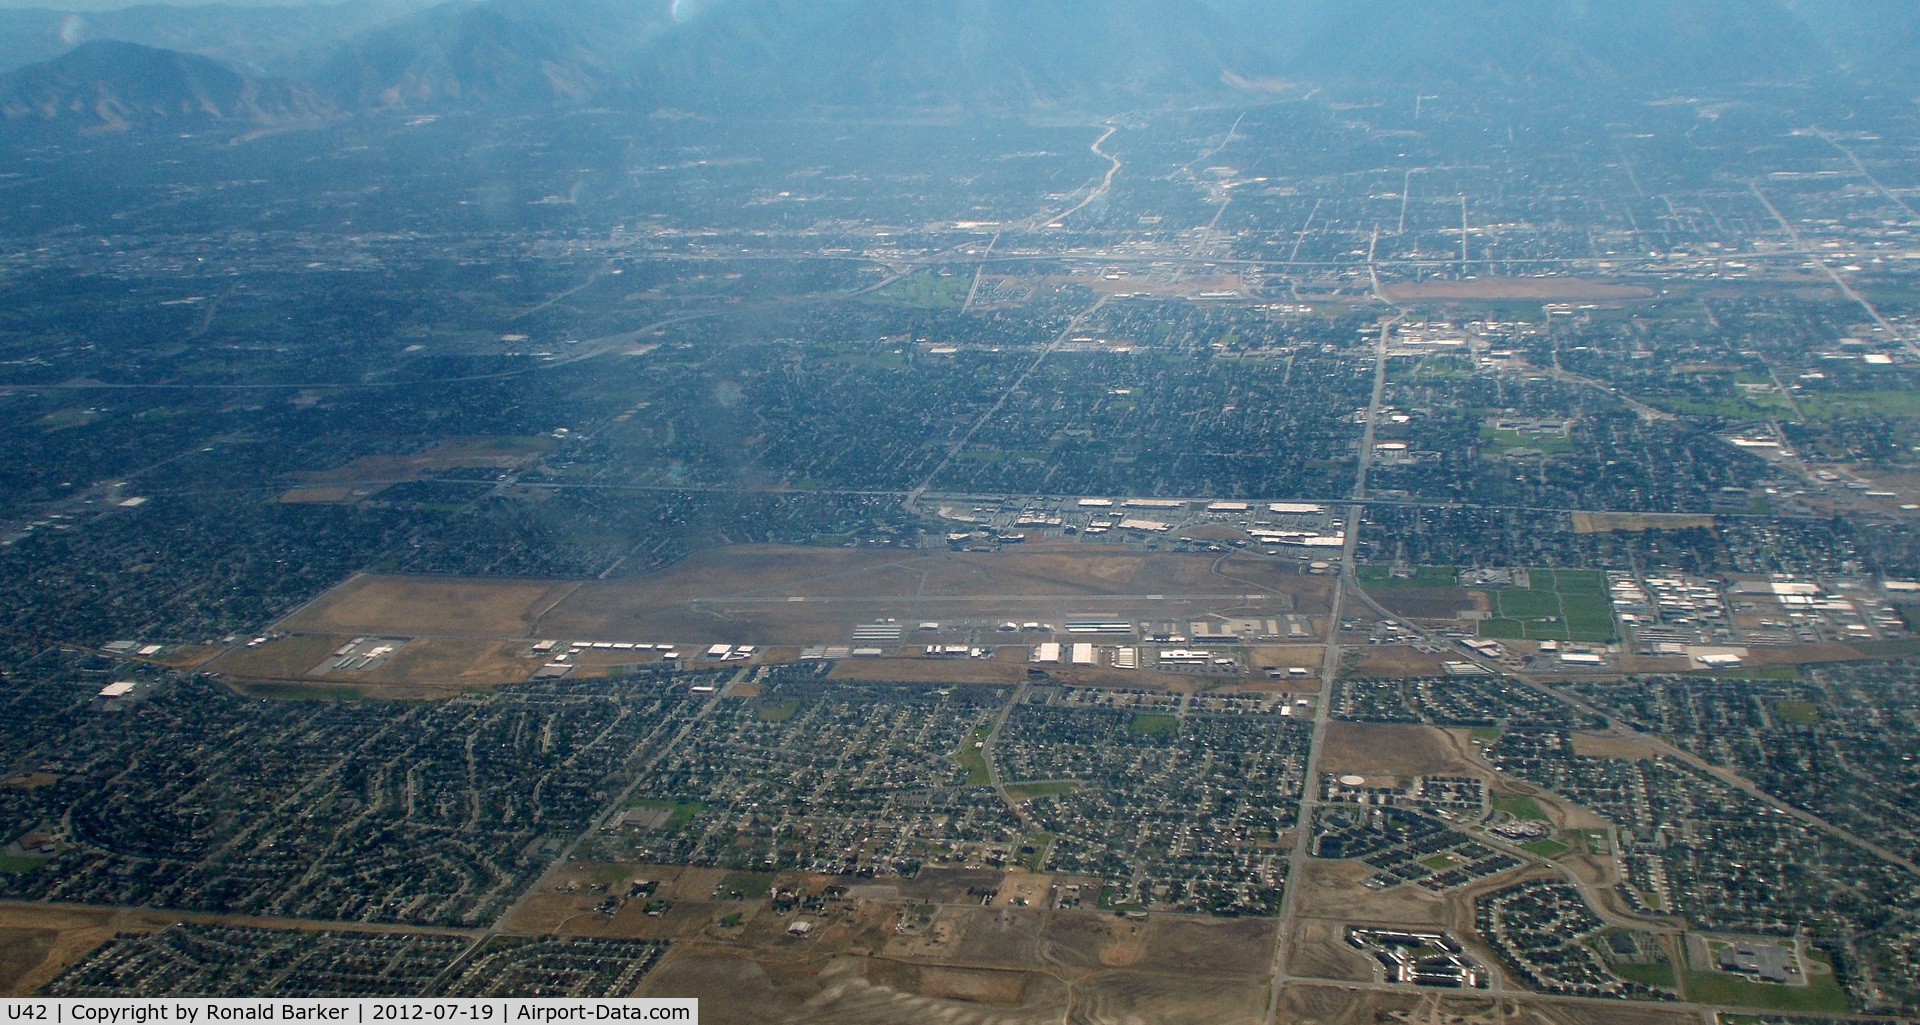 South Valley Regional Airport (U42) - South Valley on approach to SLC